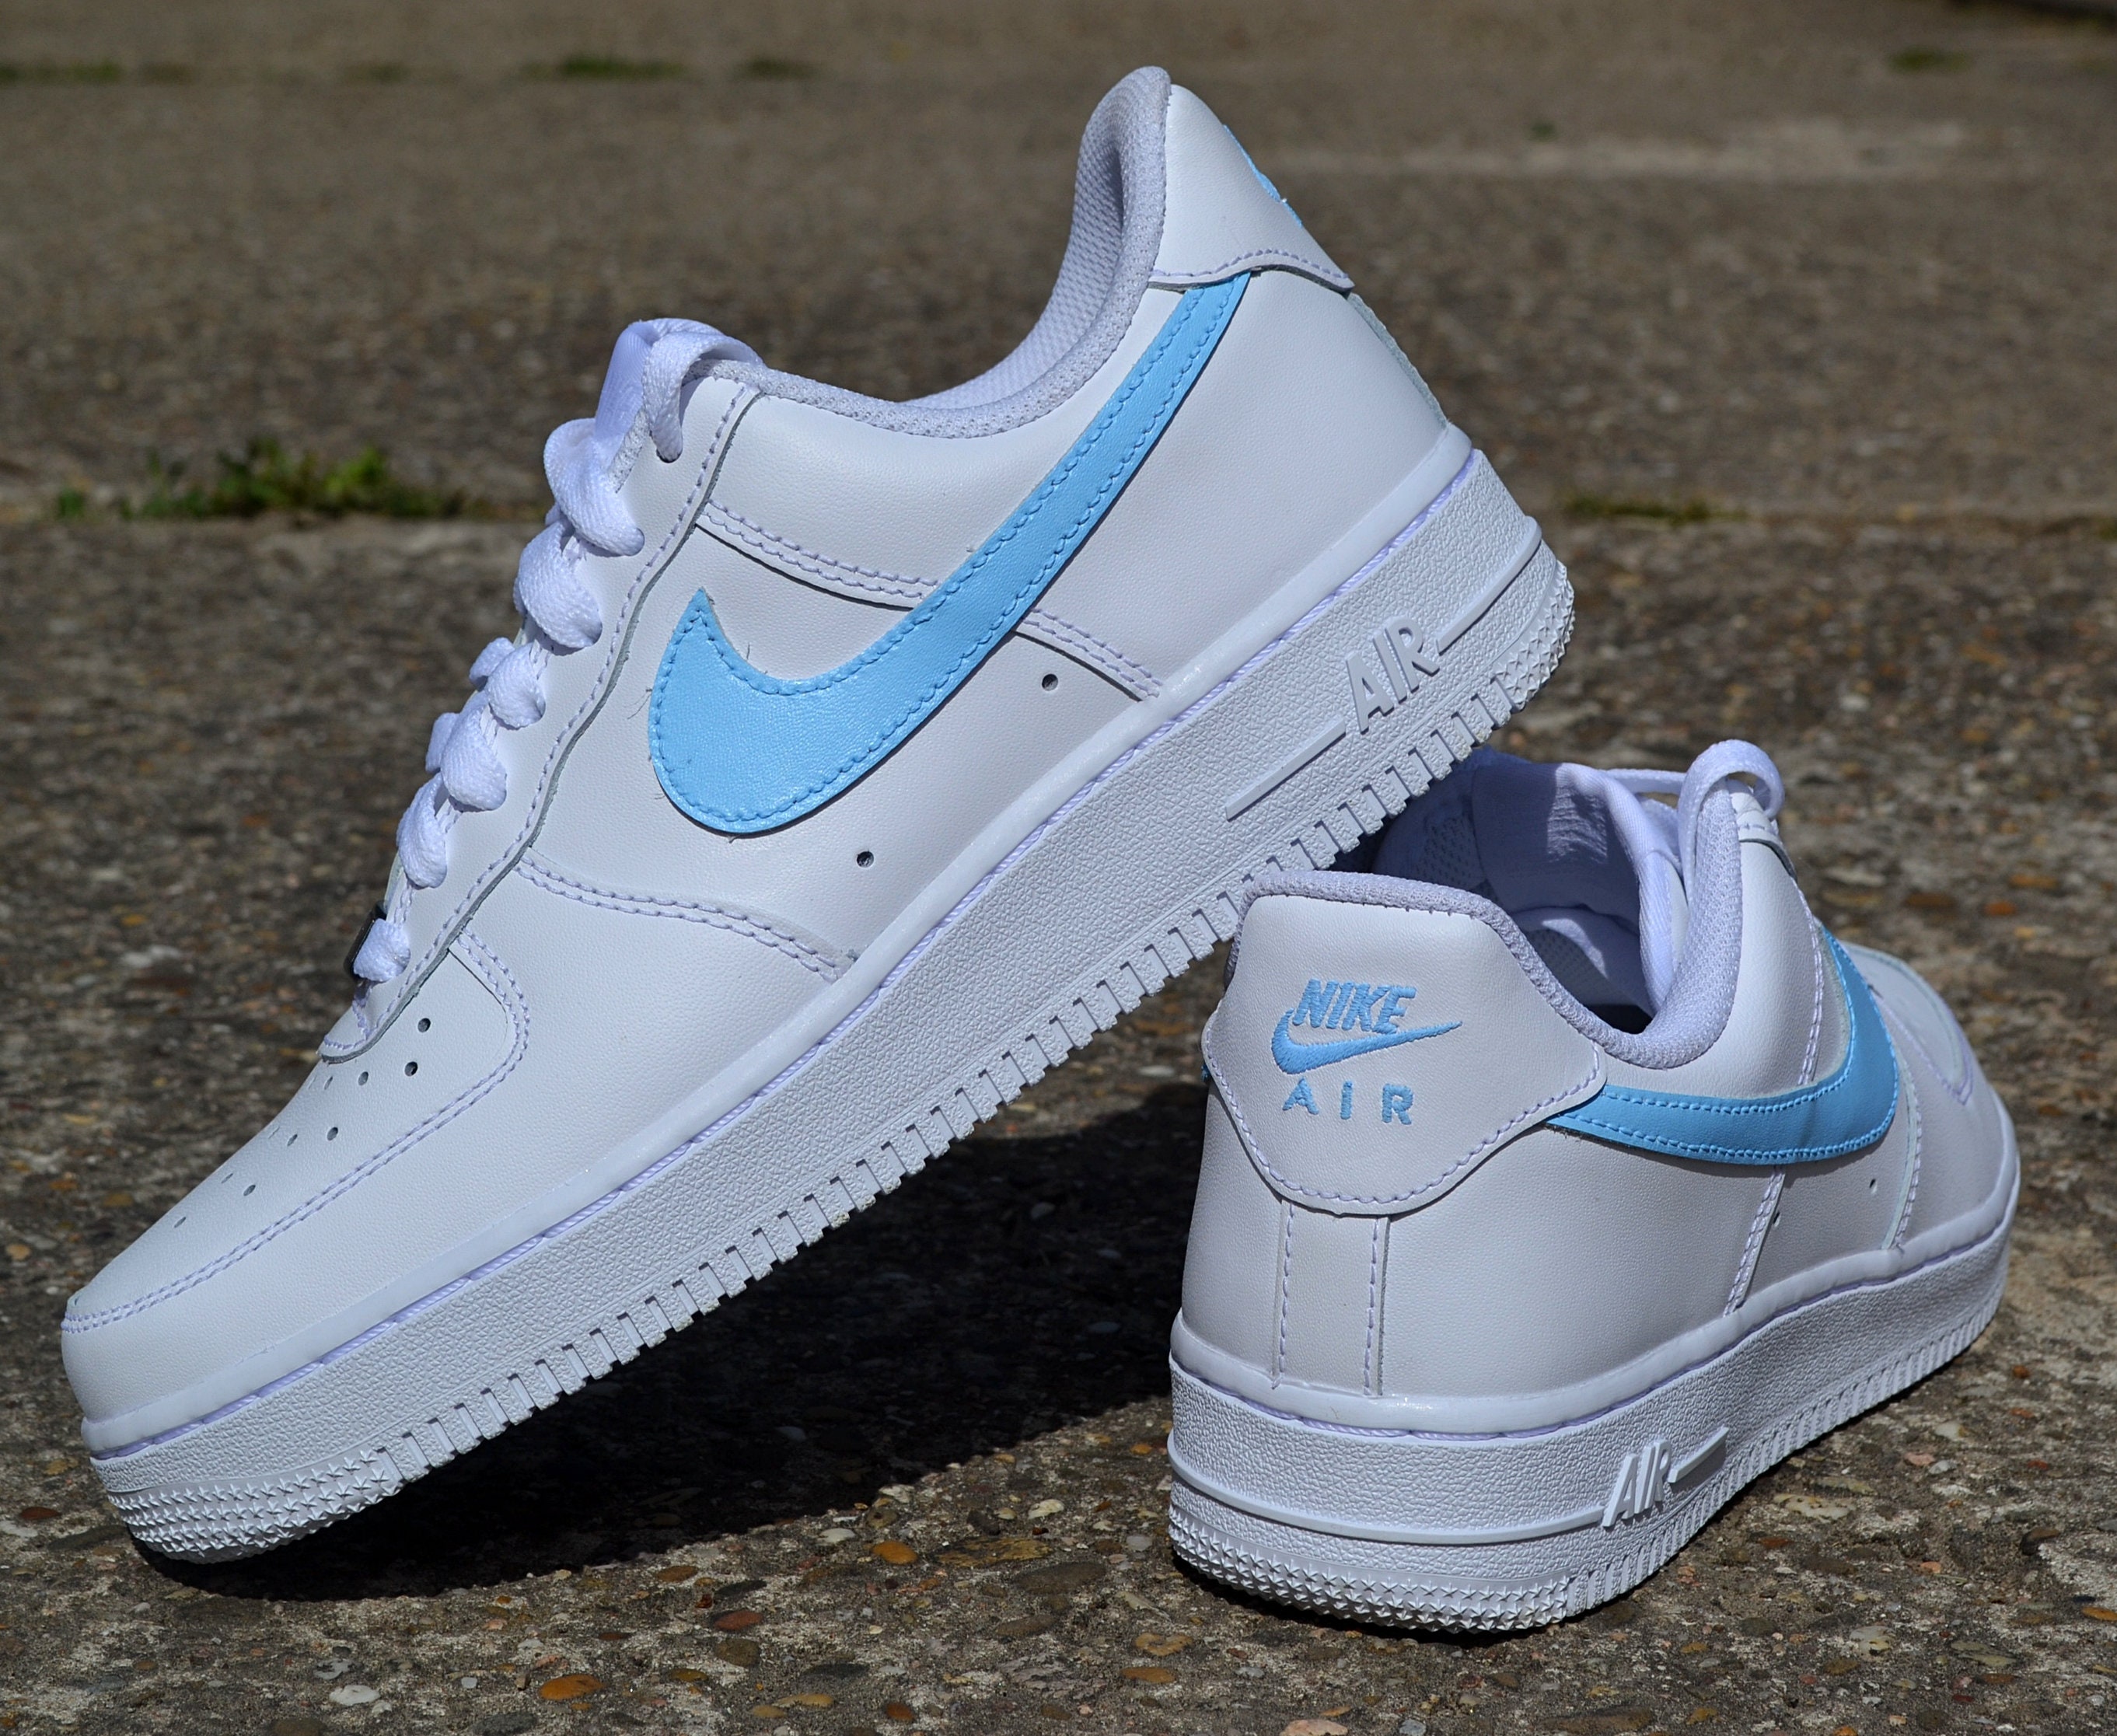 Nike Air Force 1 Custom Pastel Colors Pastell Design - Etsy Finland